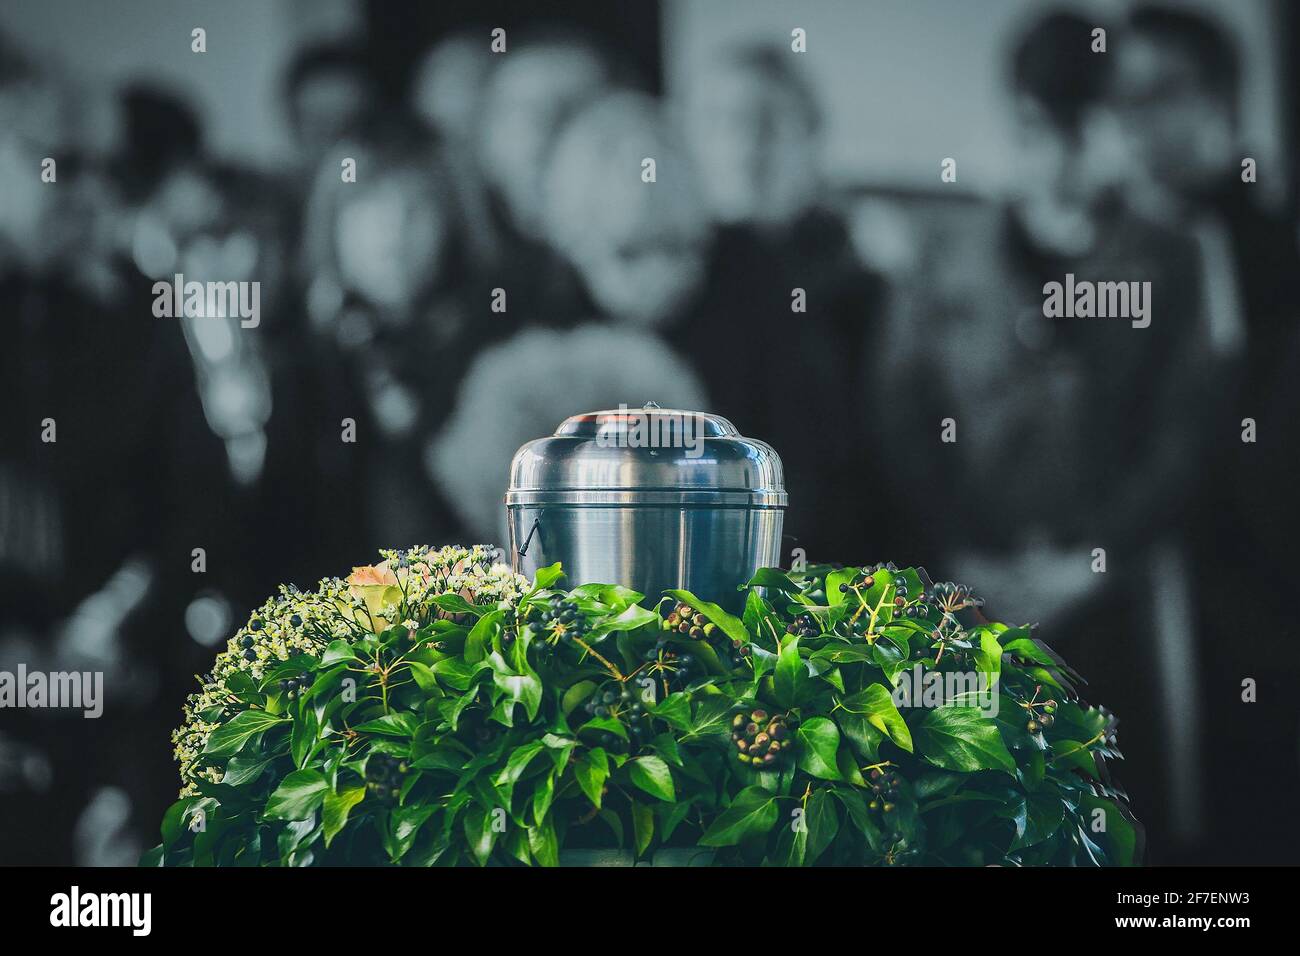 A metal urn with ashes of a dead person on a funeral, with people mourning in the background on a memorial service. Sad grieving moment at the end of Stock Photo